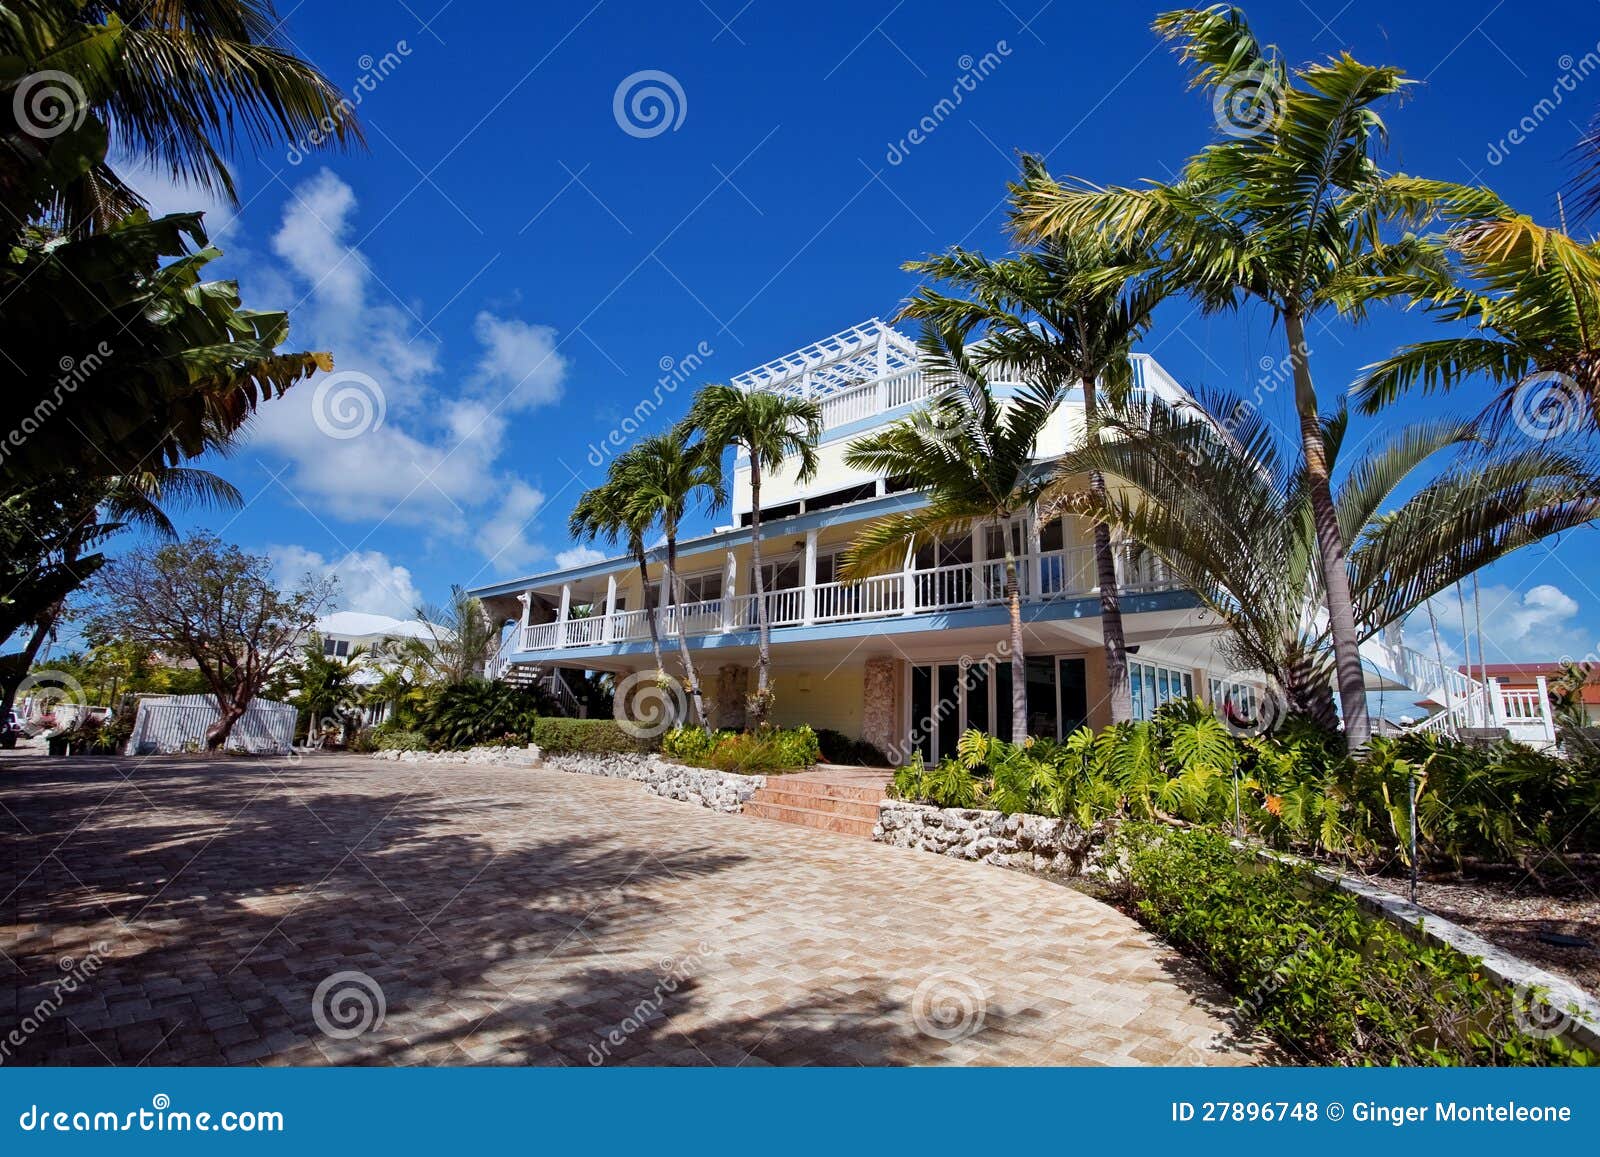 Tropical Vacation Home Royalty Free Stock Photos - Image: 27896748